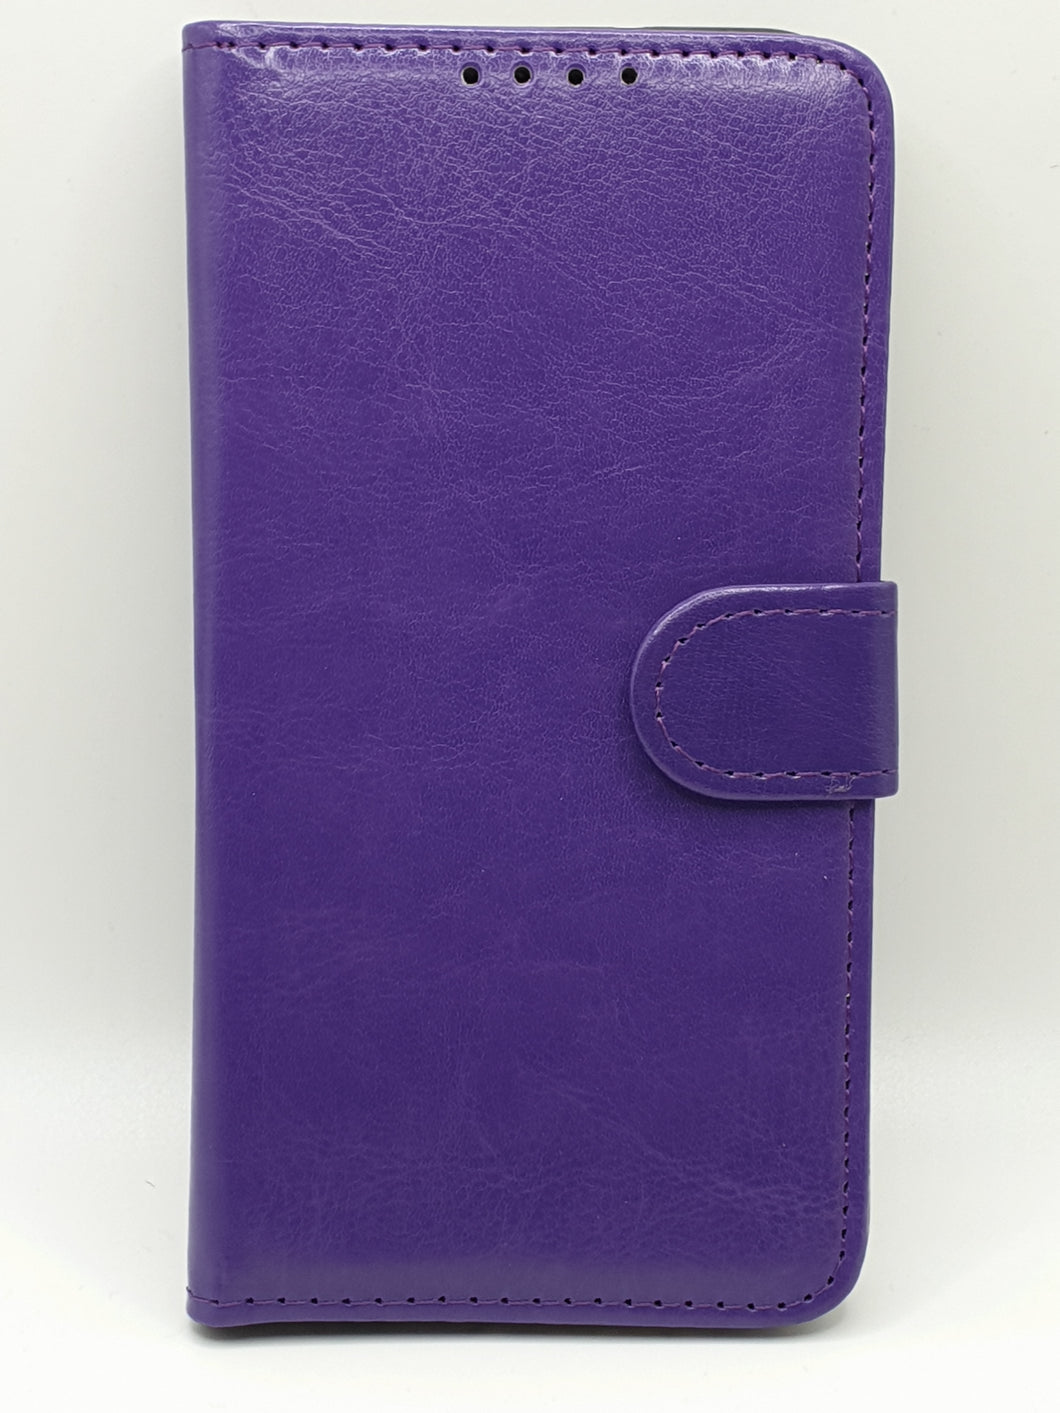 Samsung A10 Wallet Card Insert Case Faux Leather Purple Full Protection Stand Case